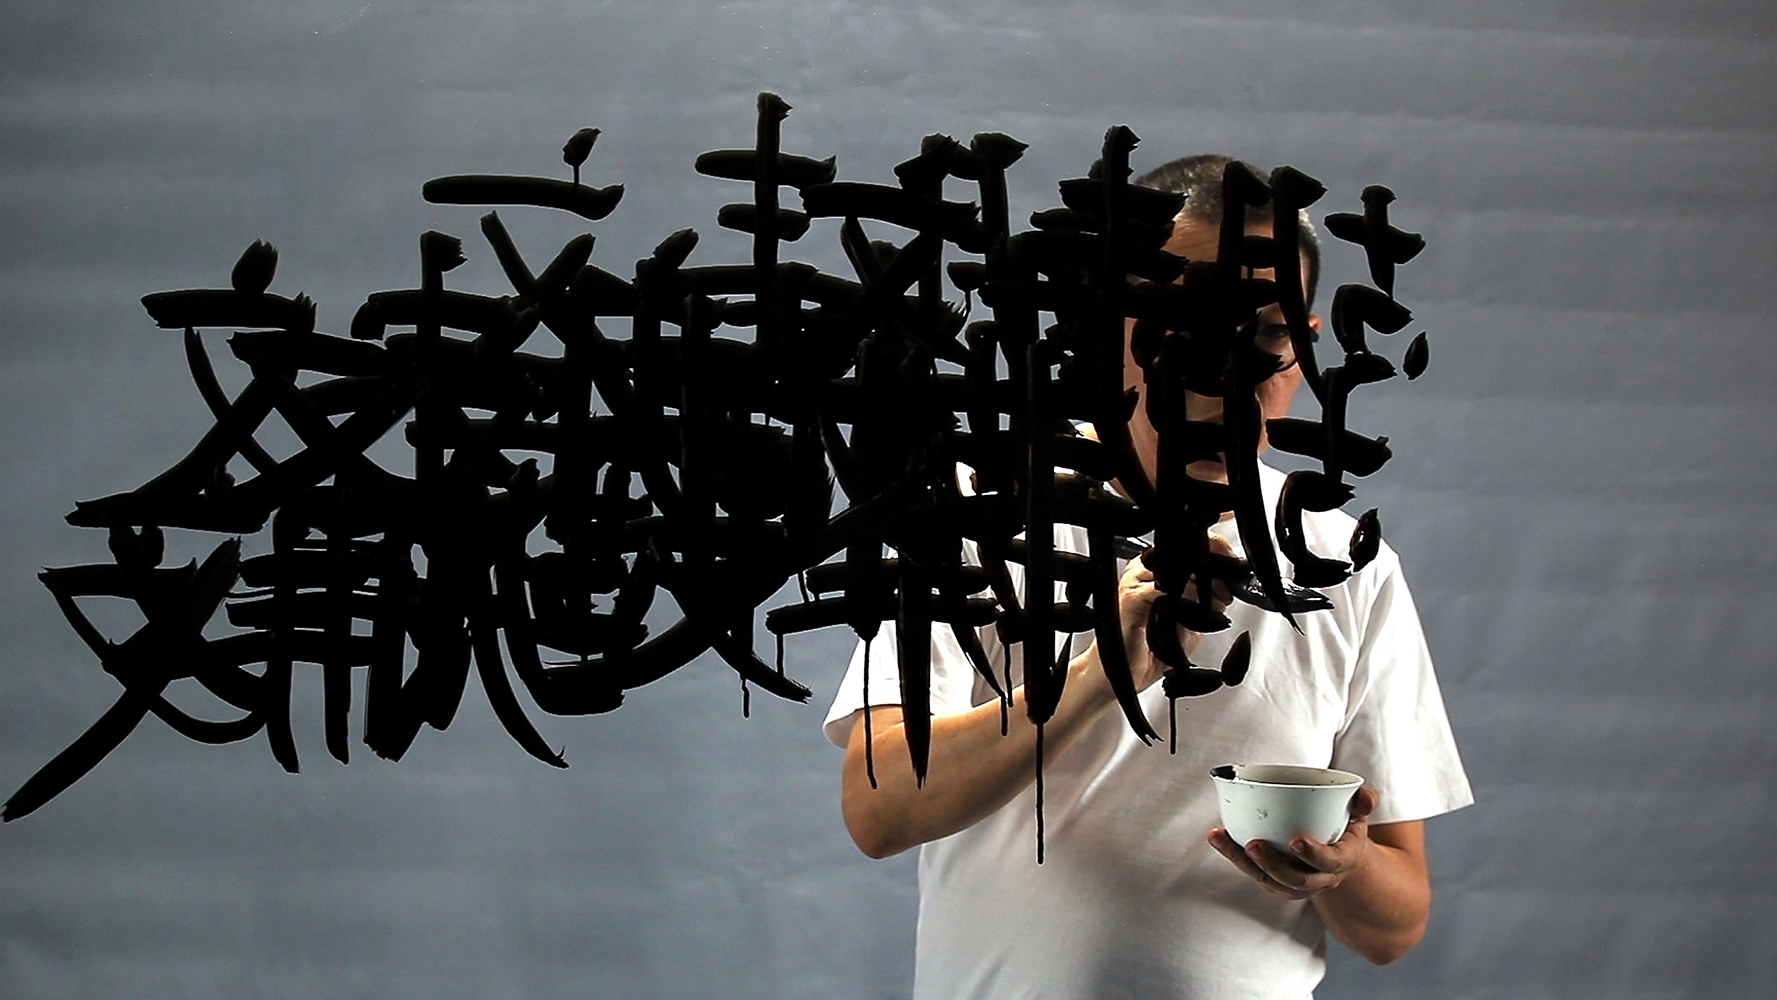 FX Harsono, 𝘞𝘳𝘪𝘵𝘪𝘯𝘨 𝘪𝘯 𝘵𝘩𝘦 𝘙𝘢𝘪𝘯, video still, 2011, courtesy the artist and Museum of Contemporary Photography